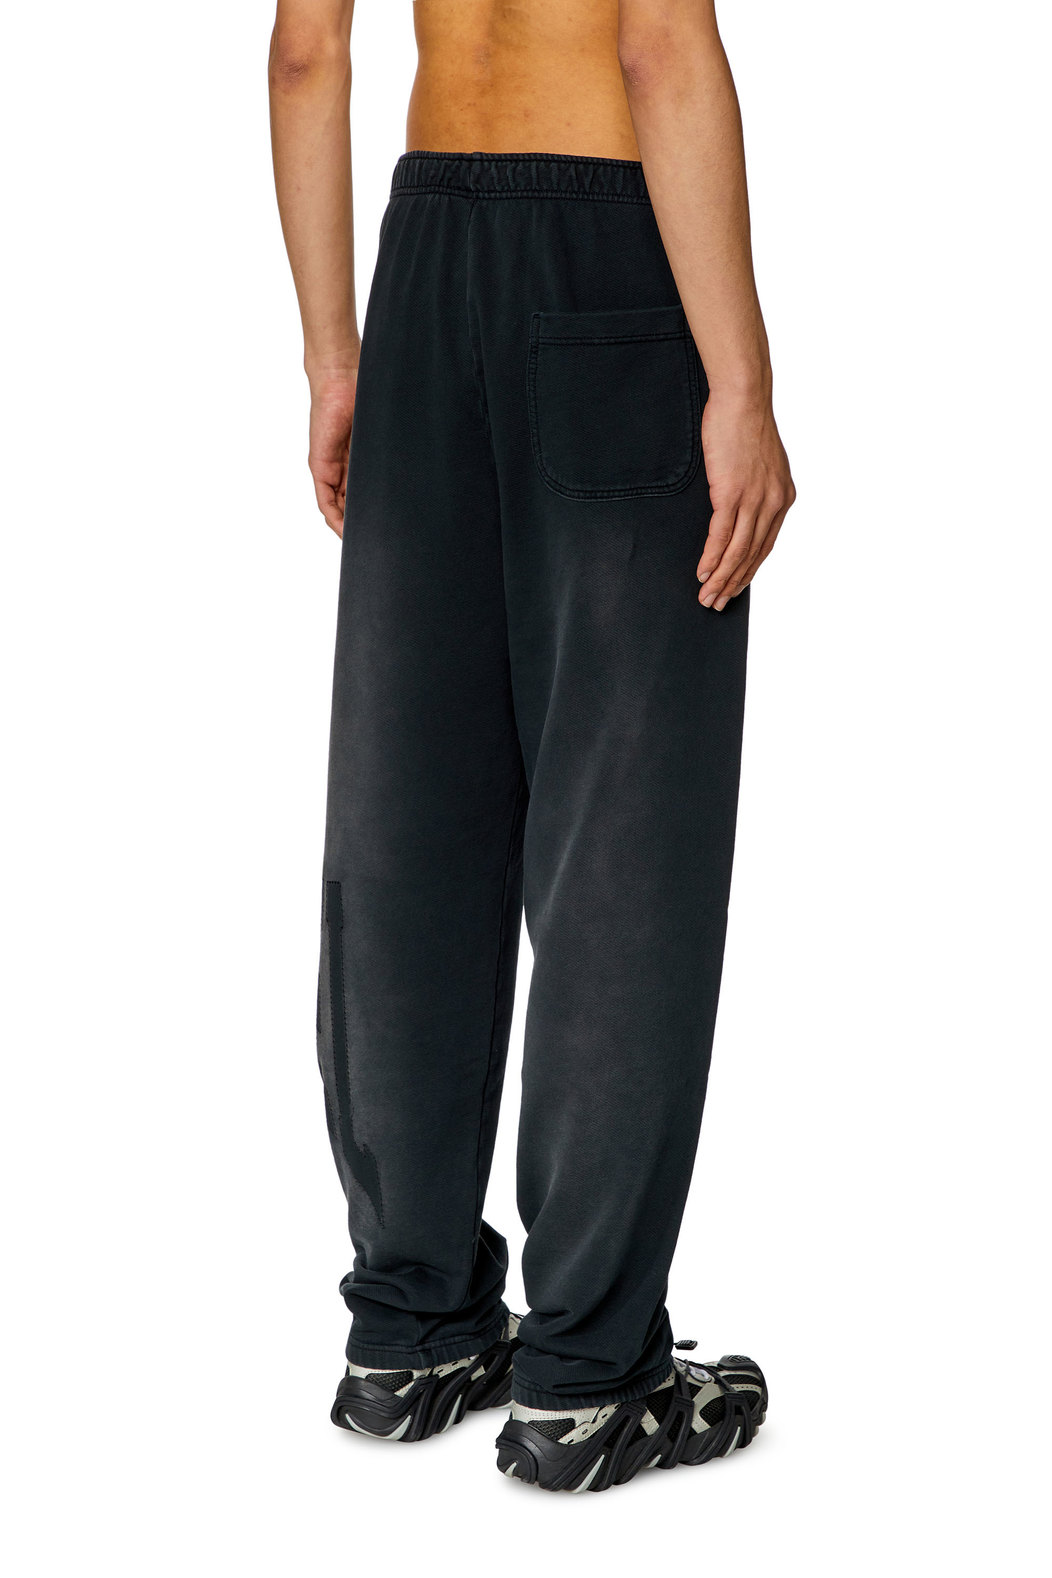 College track pants with LIES patches